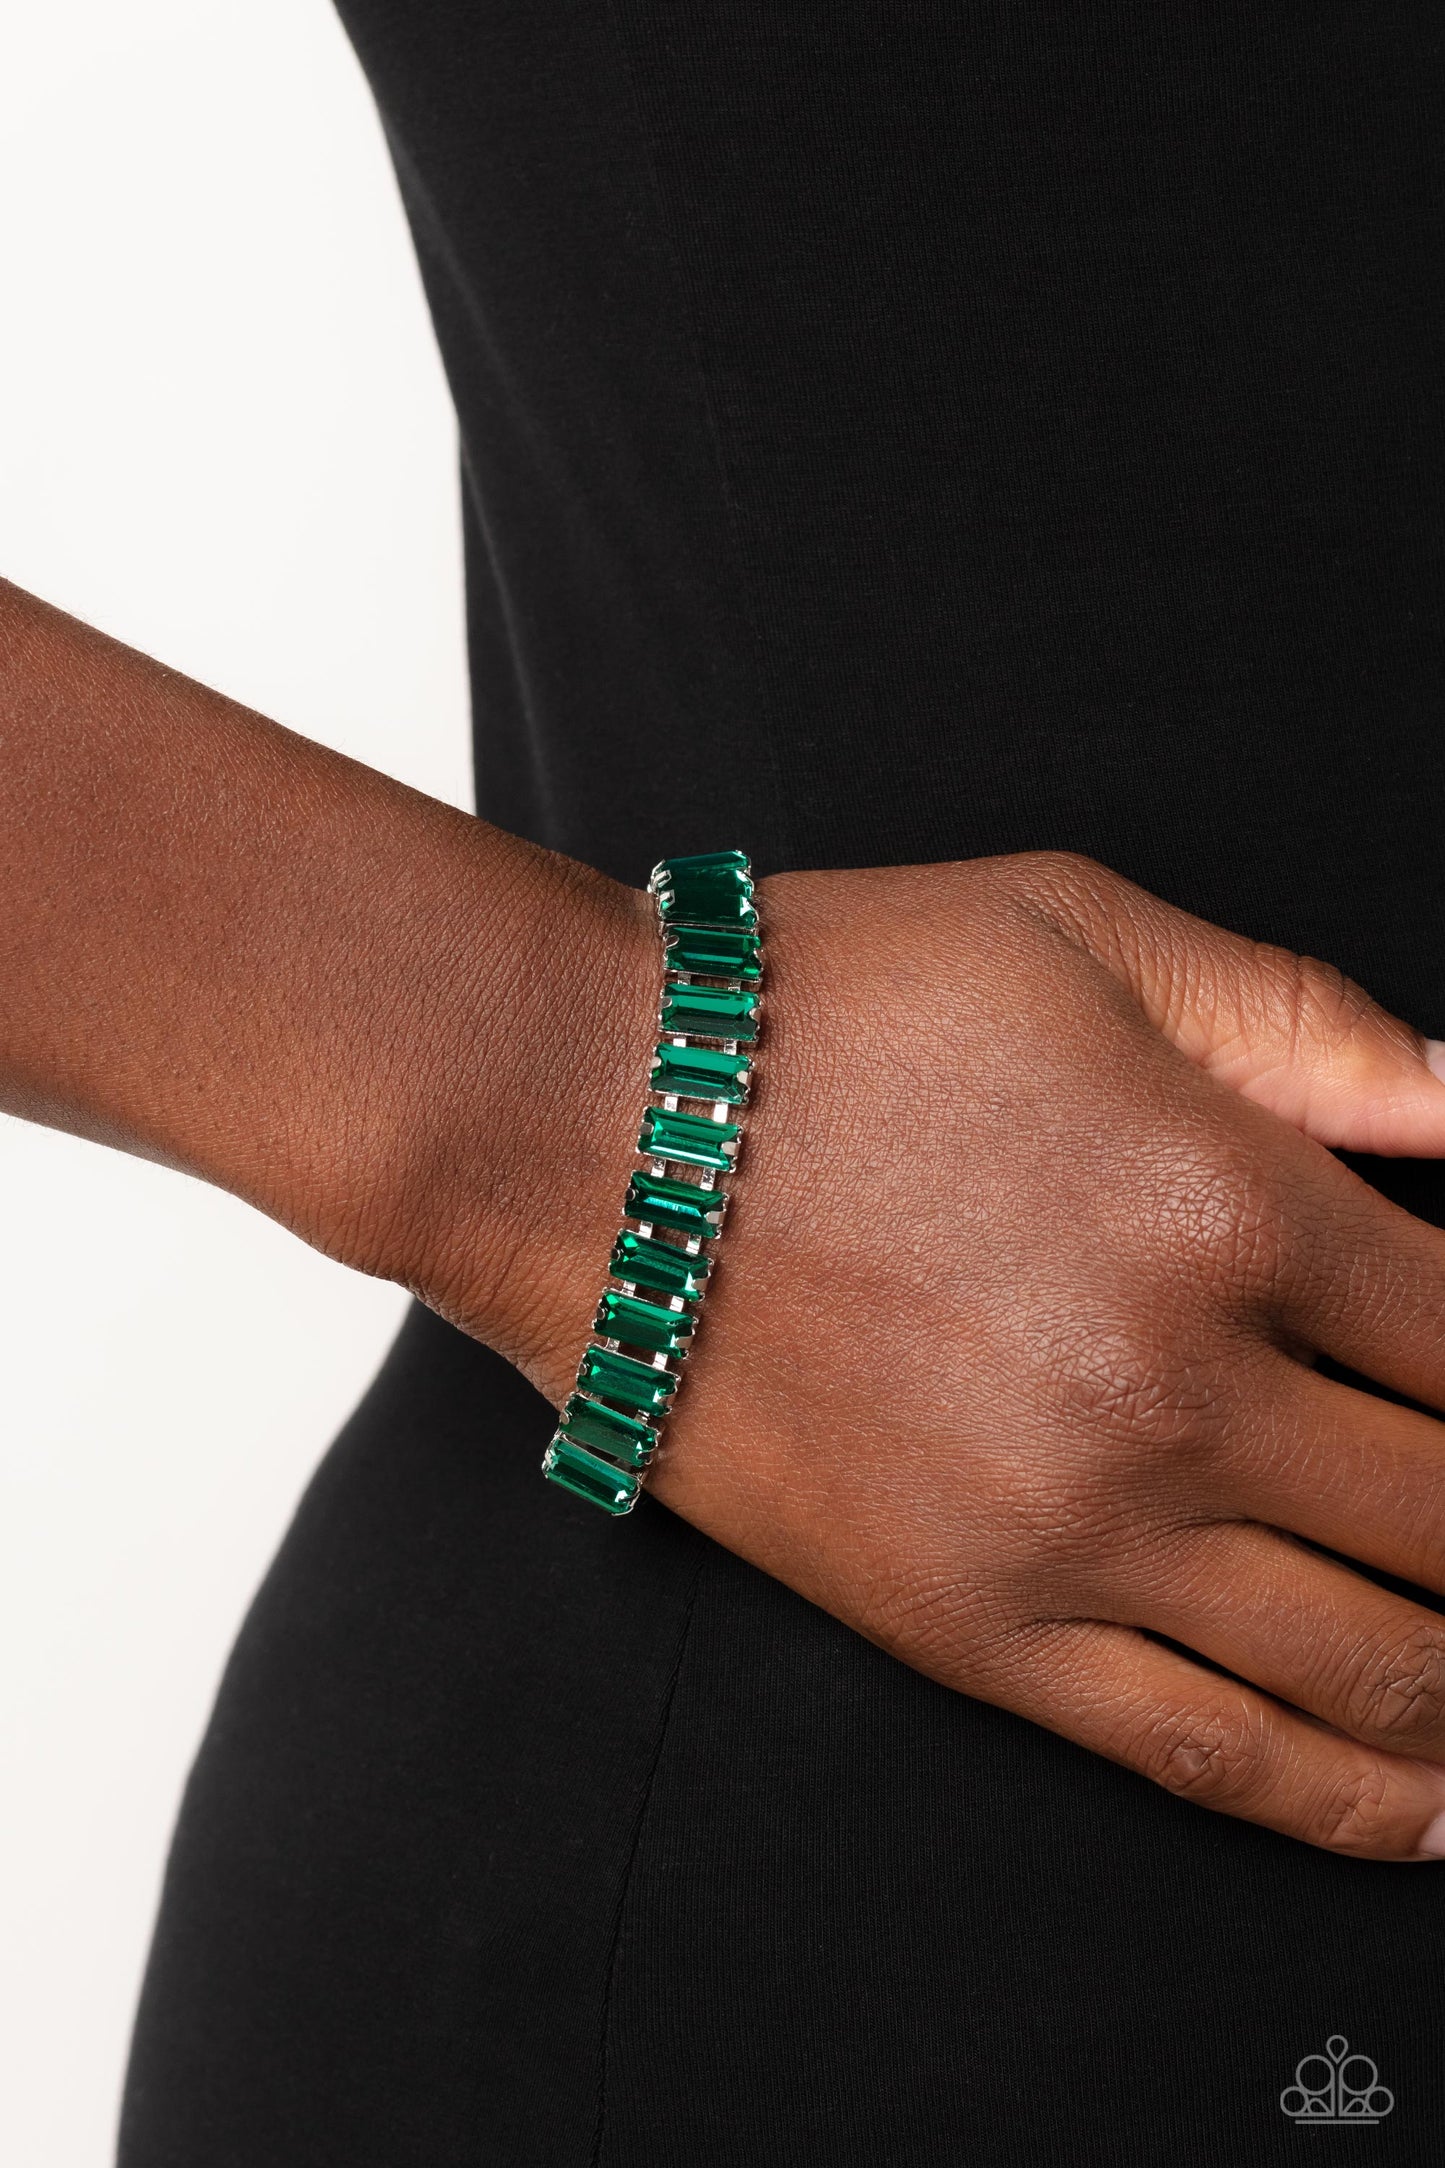 Darling Debutante - Green Gem Bracelet - Paparazzi Accessories - Set in prominent, pronged silver fittings, a glassy collection of emerald-cut, green gems fall in line around the wrist, creating a stunning, light-catching display. Features an adjustable clasp closure. Sold as one individual bracelet.